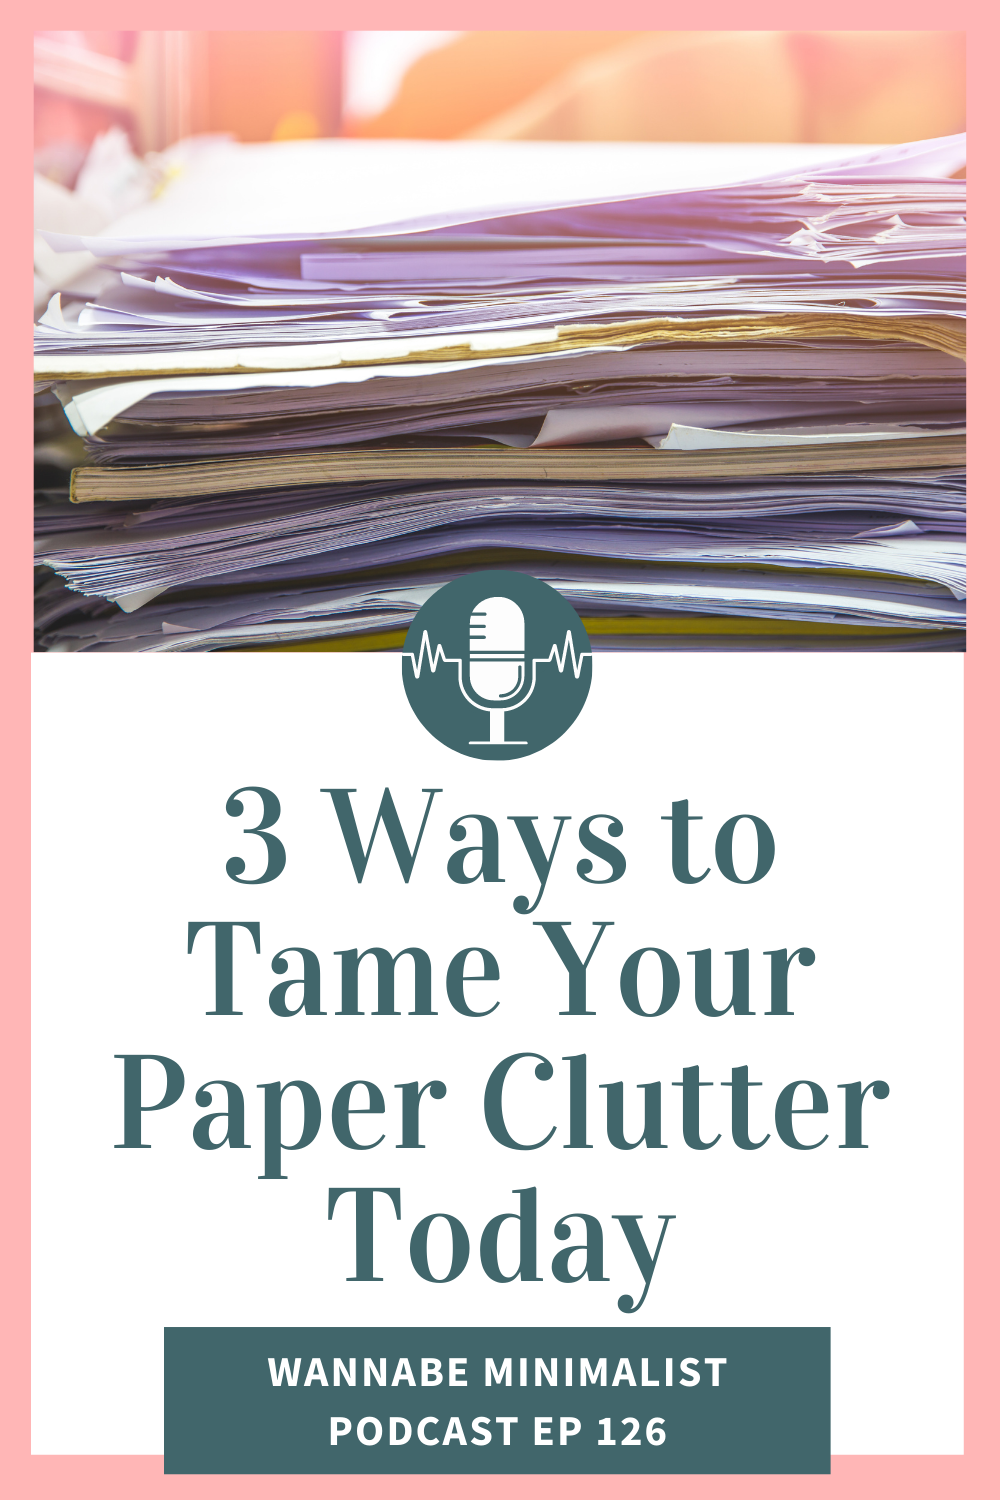 3 Ways to Tame Your Paper Clutter Today